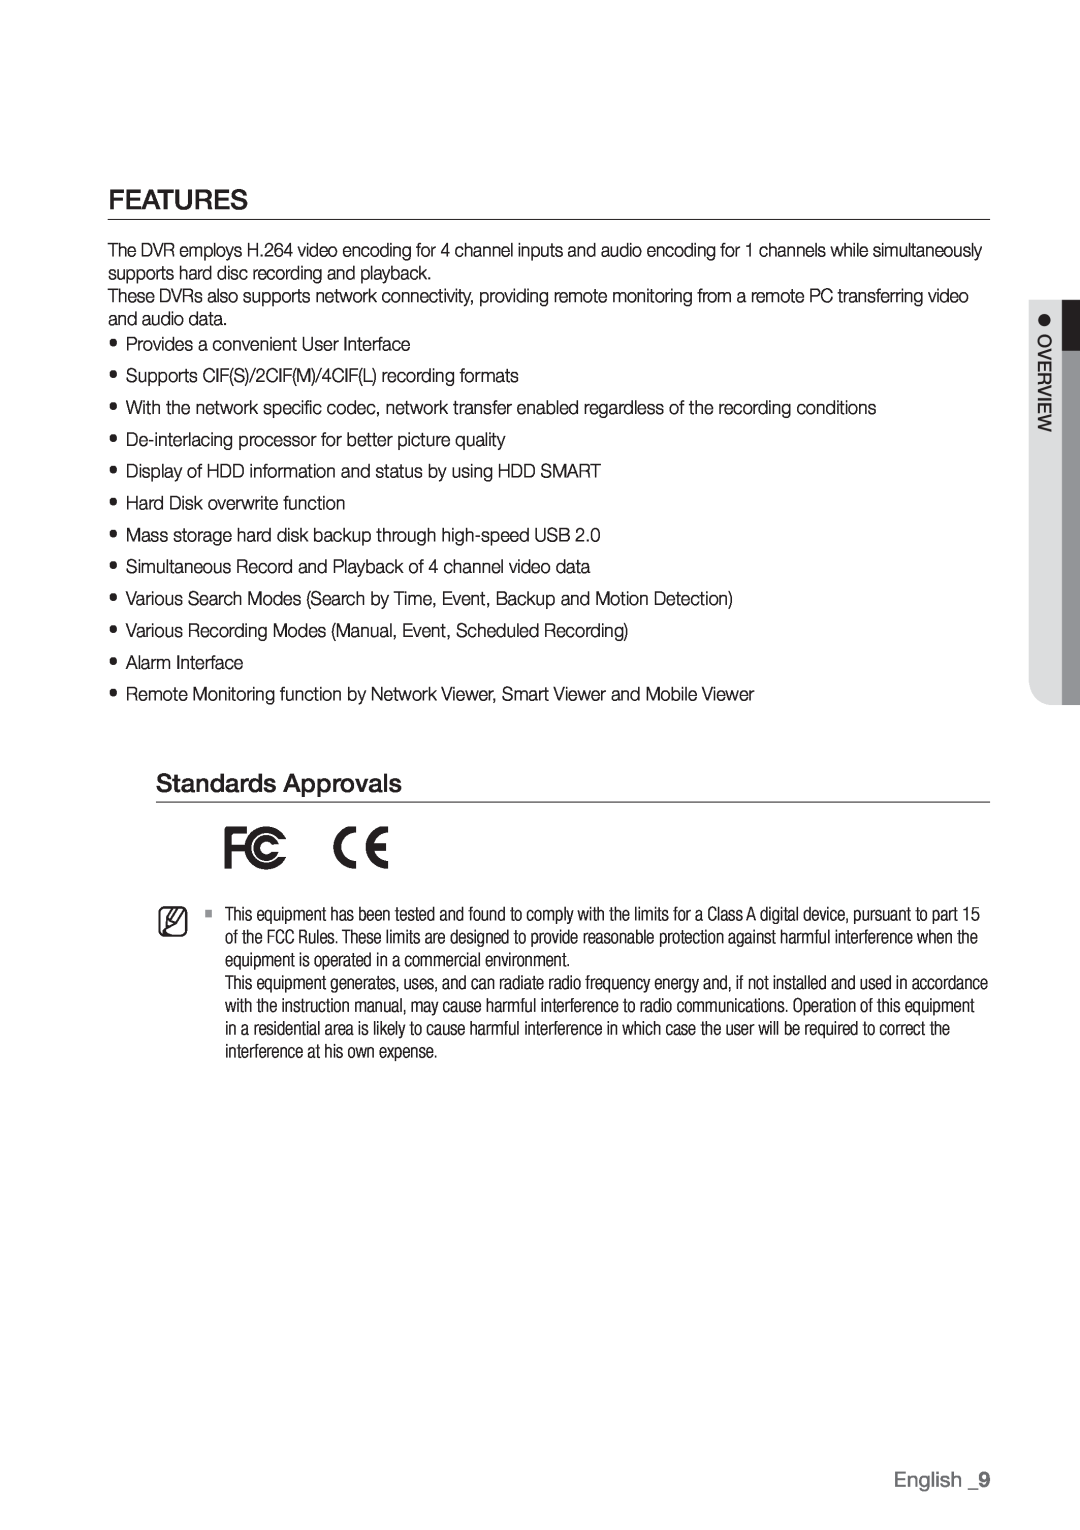 Samsung SDR3100 user manual Features, Standards Approvals, English _9 